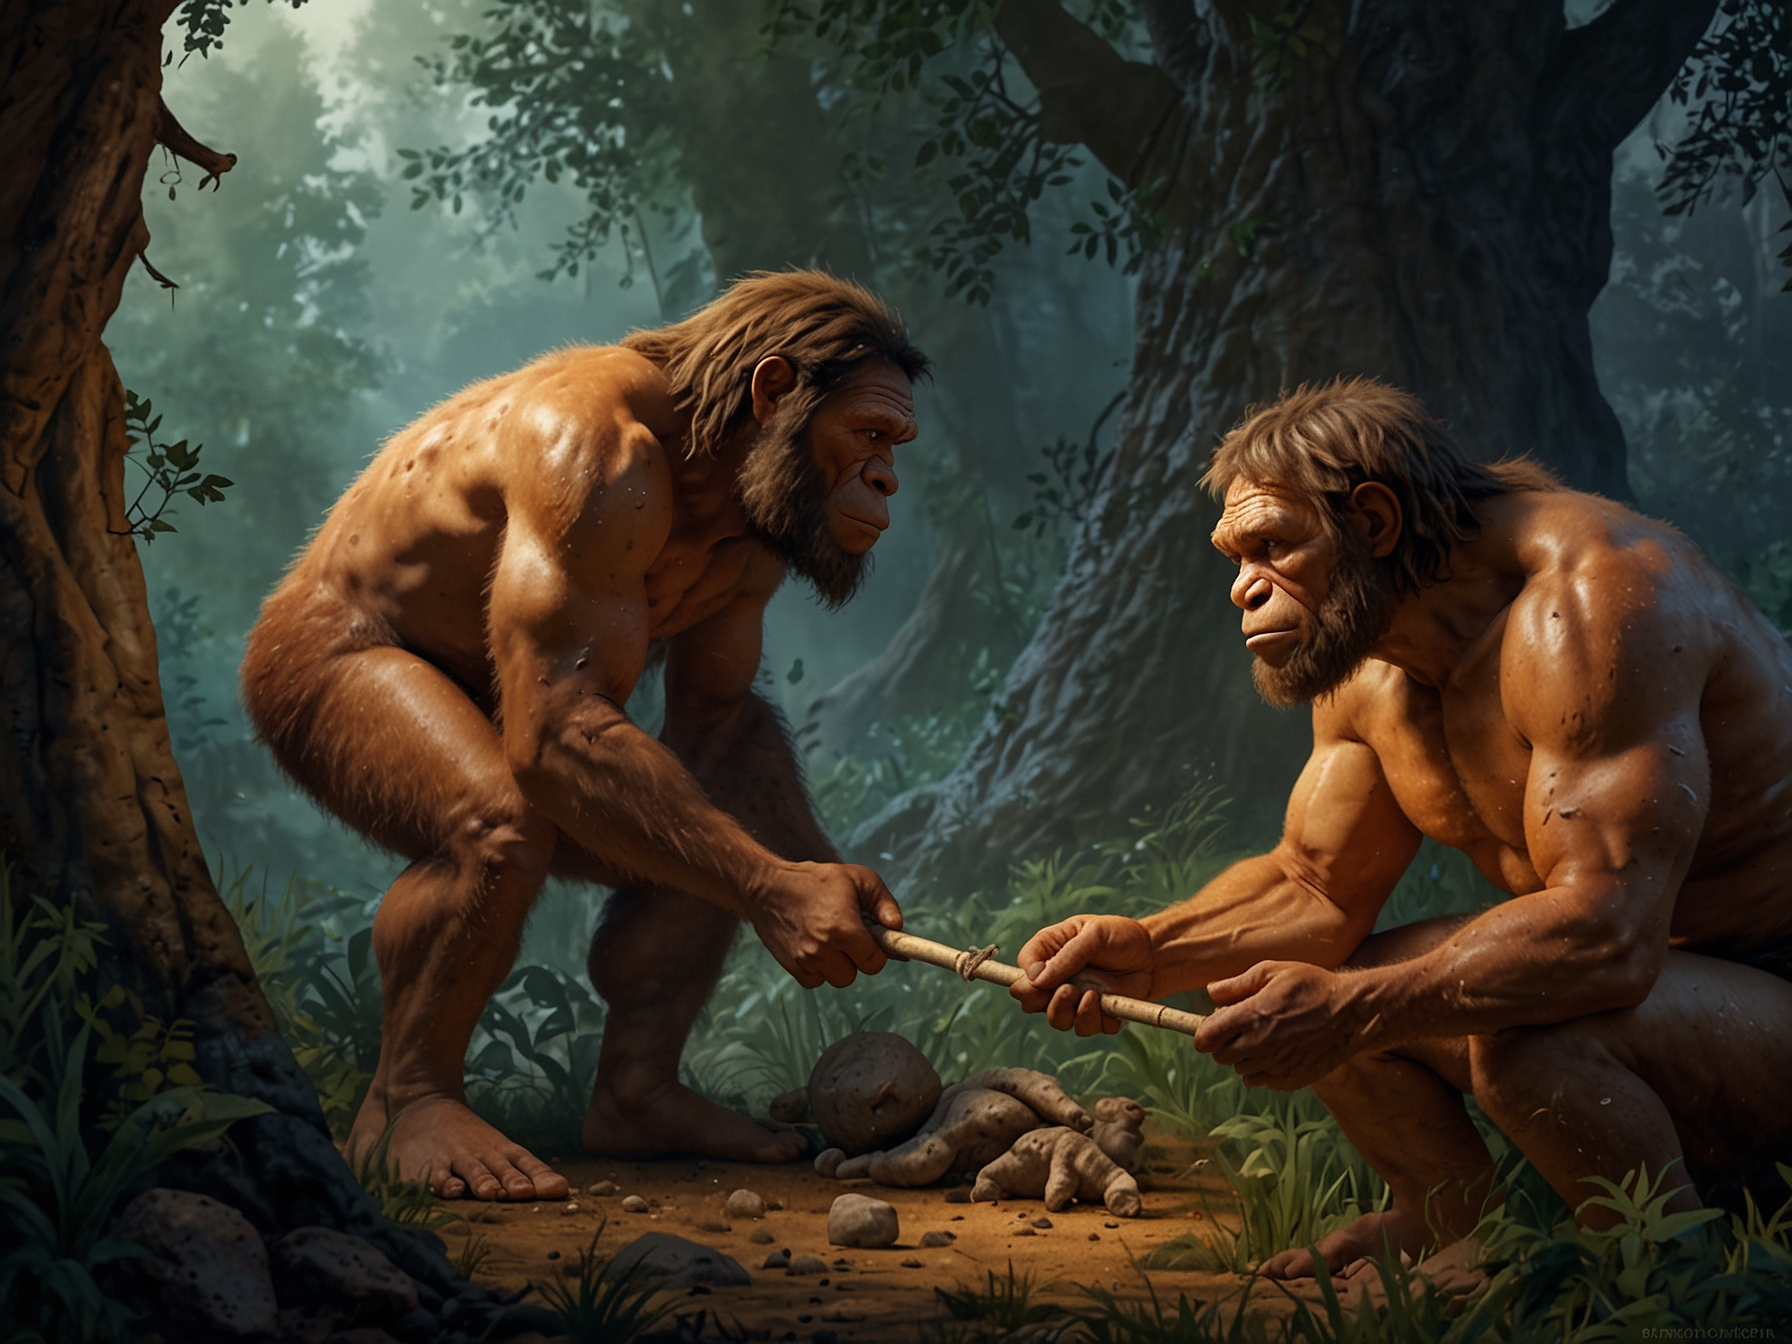 An image depicting human and Neanderthal interbreeding, symbolizing genetic inheritance across autosomes, with scientific tools representing advances in ancient DNA extraction and sequencing.